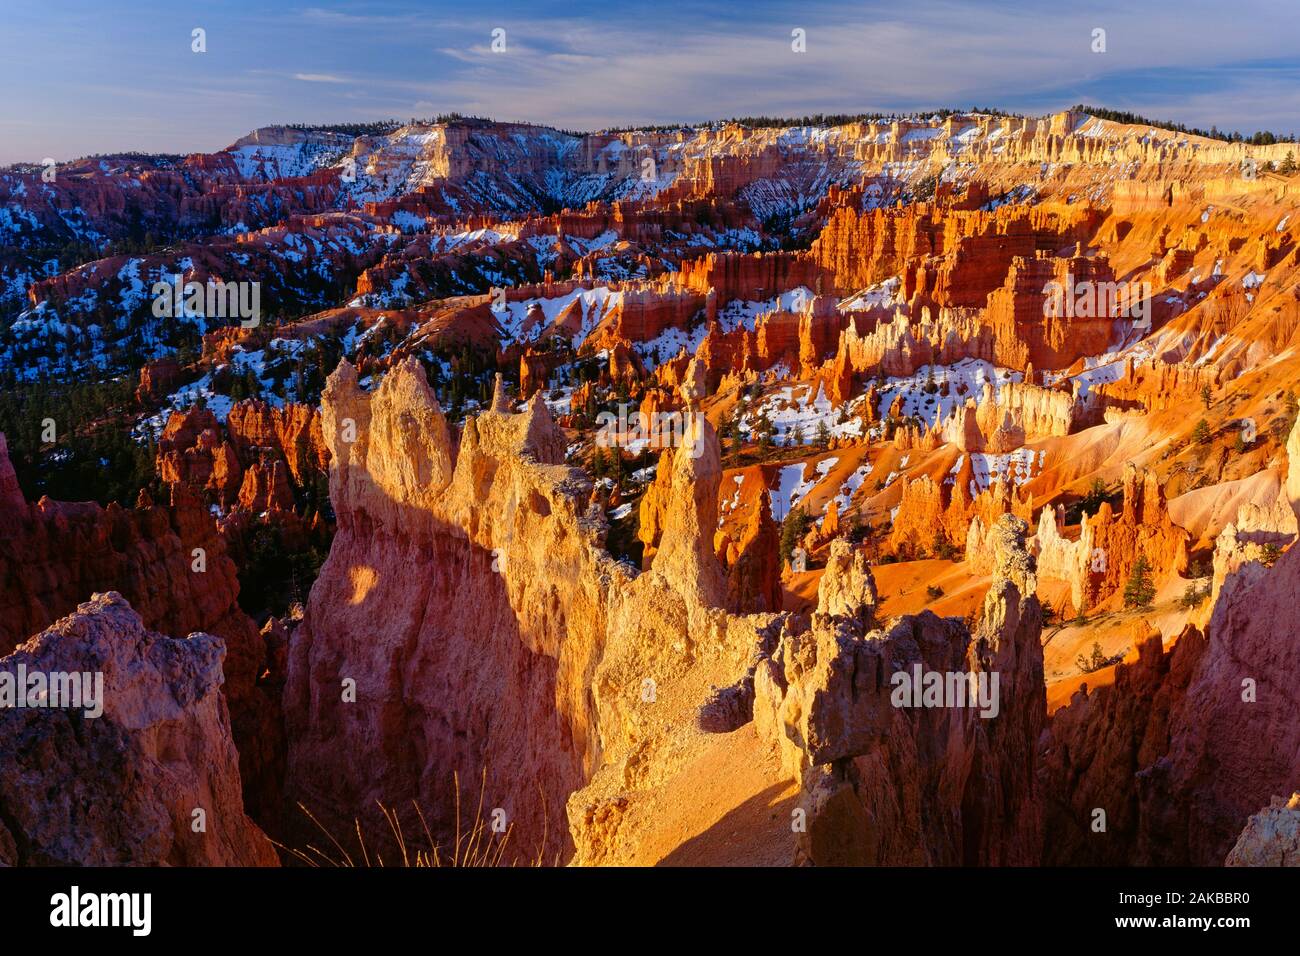 Landscape with view of hoodoo rock formations in Bryce Canyon National Park with snow in winter, Utah, USA Stock Photo